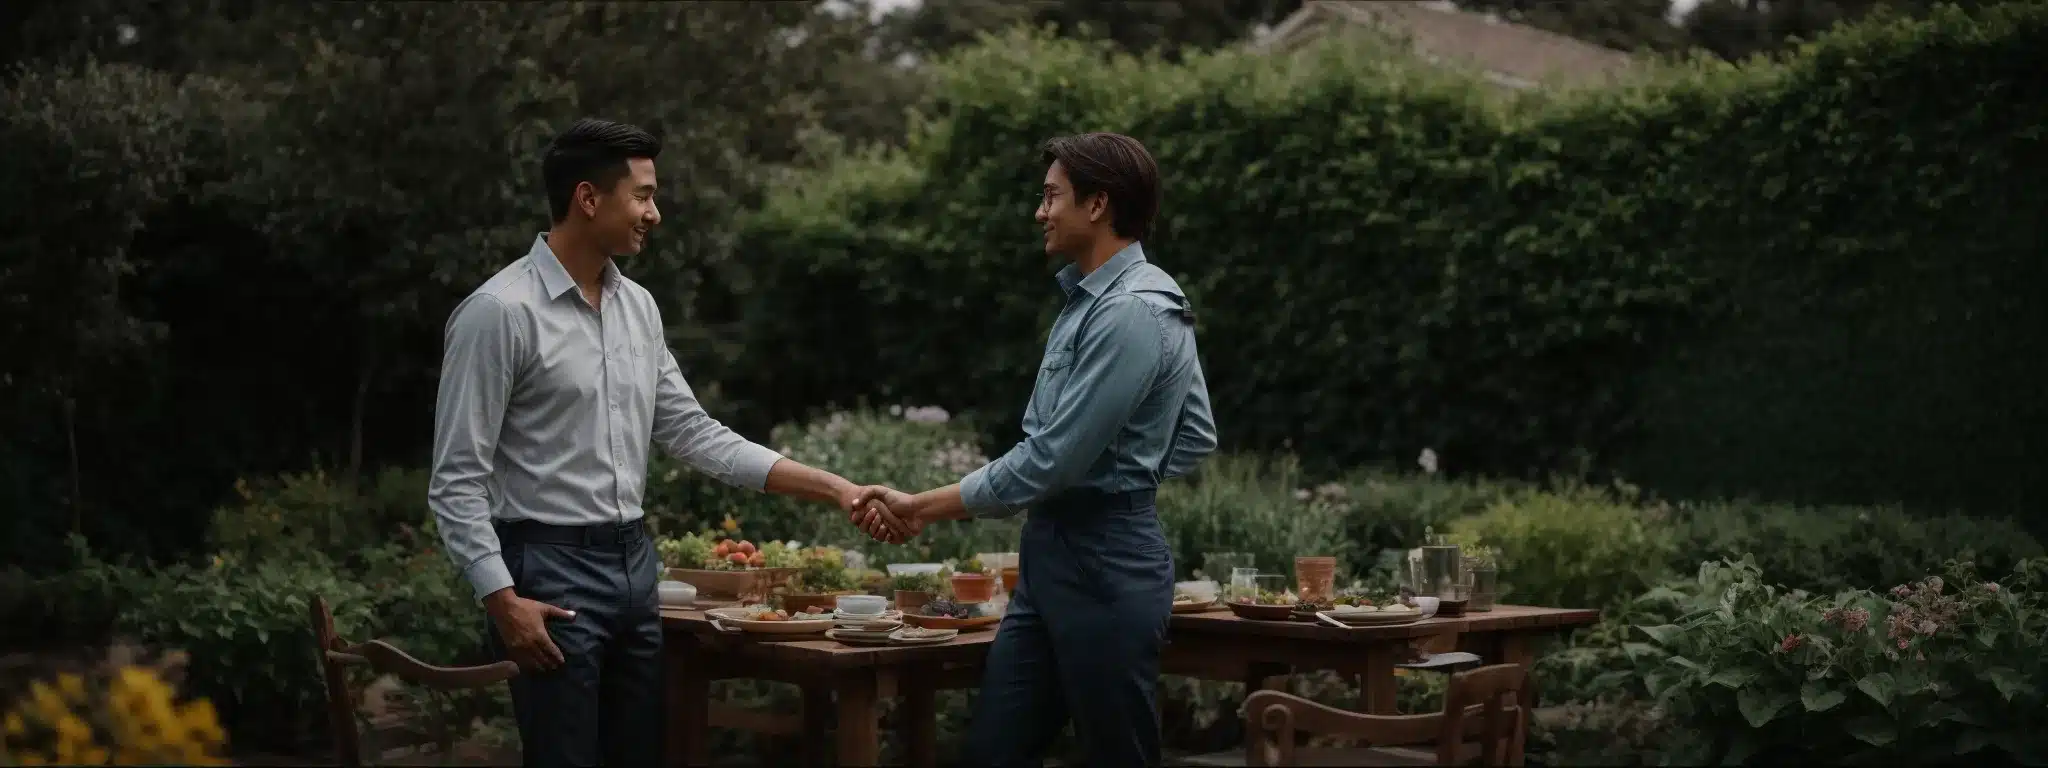 Two Professionals Shaking Hands Across A Table With A Flourishing Garden In The Background.